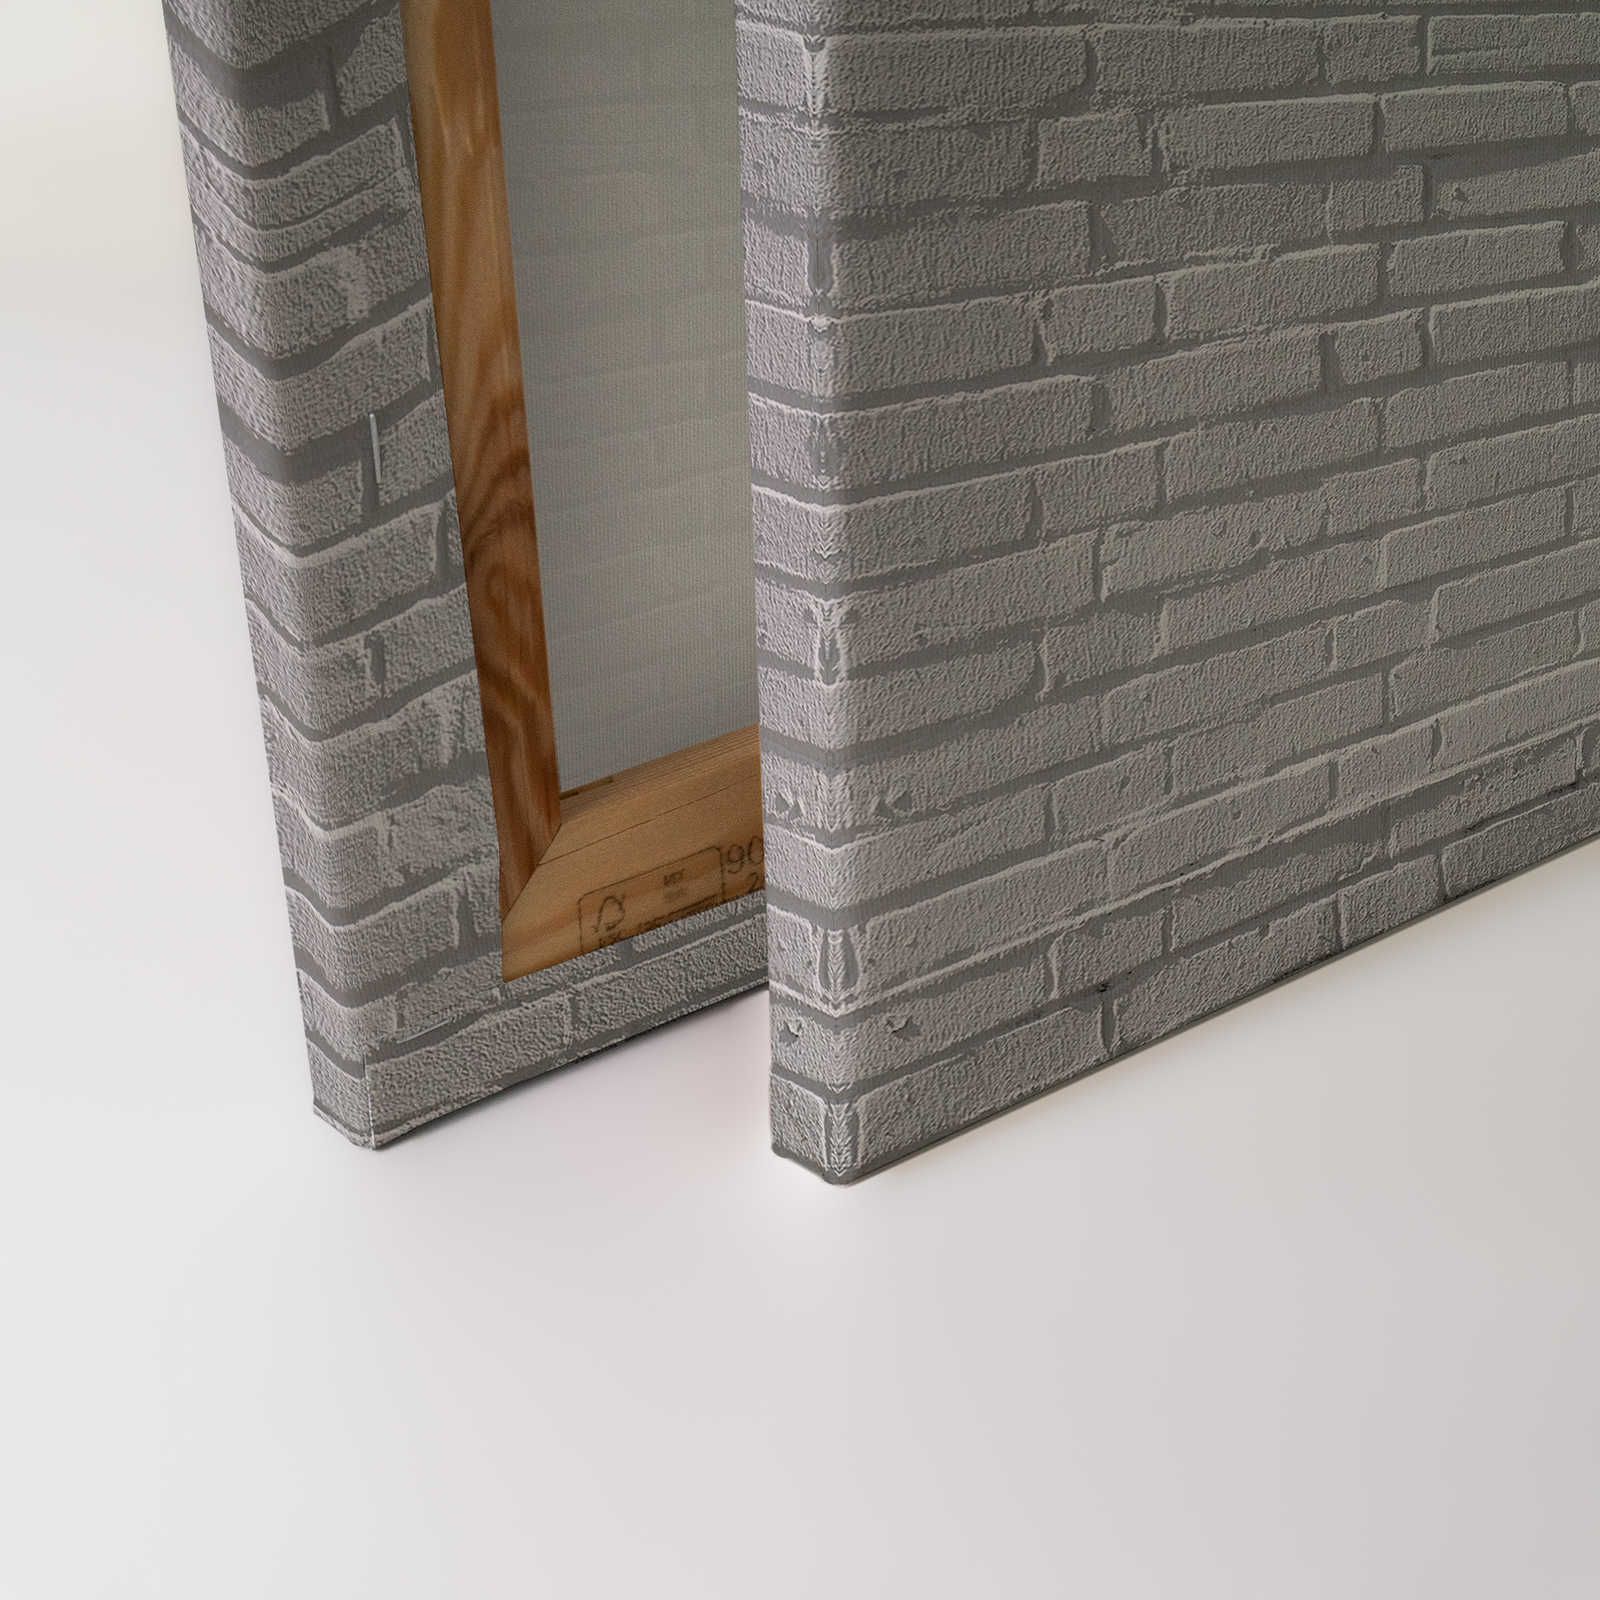             Canvas painting grey brick wall in 3D look - 0,90 m x 0,60 m
        